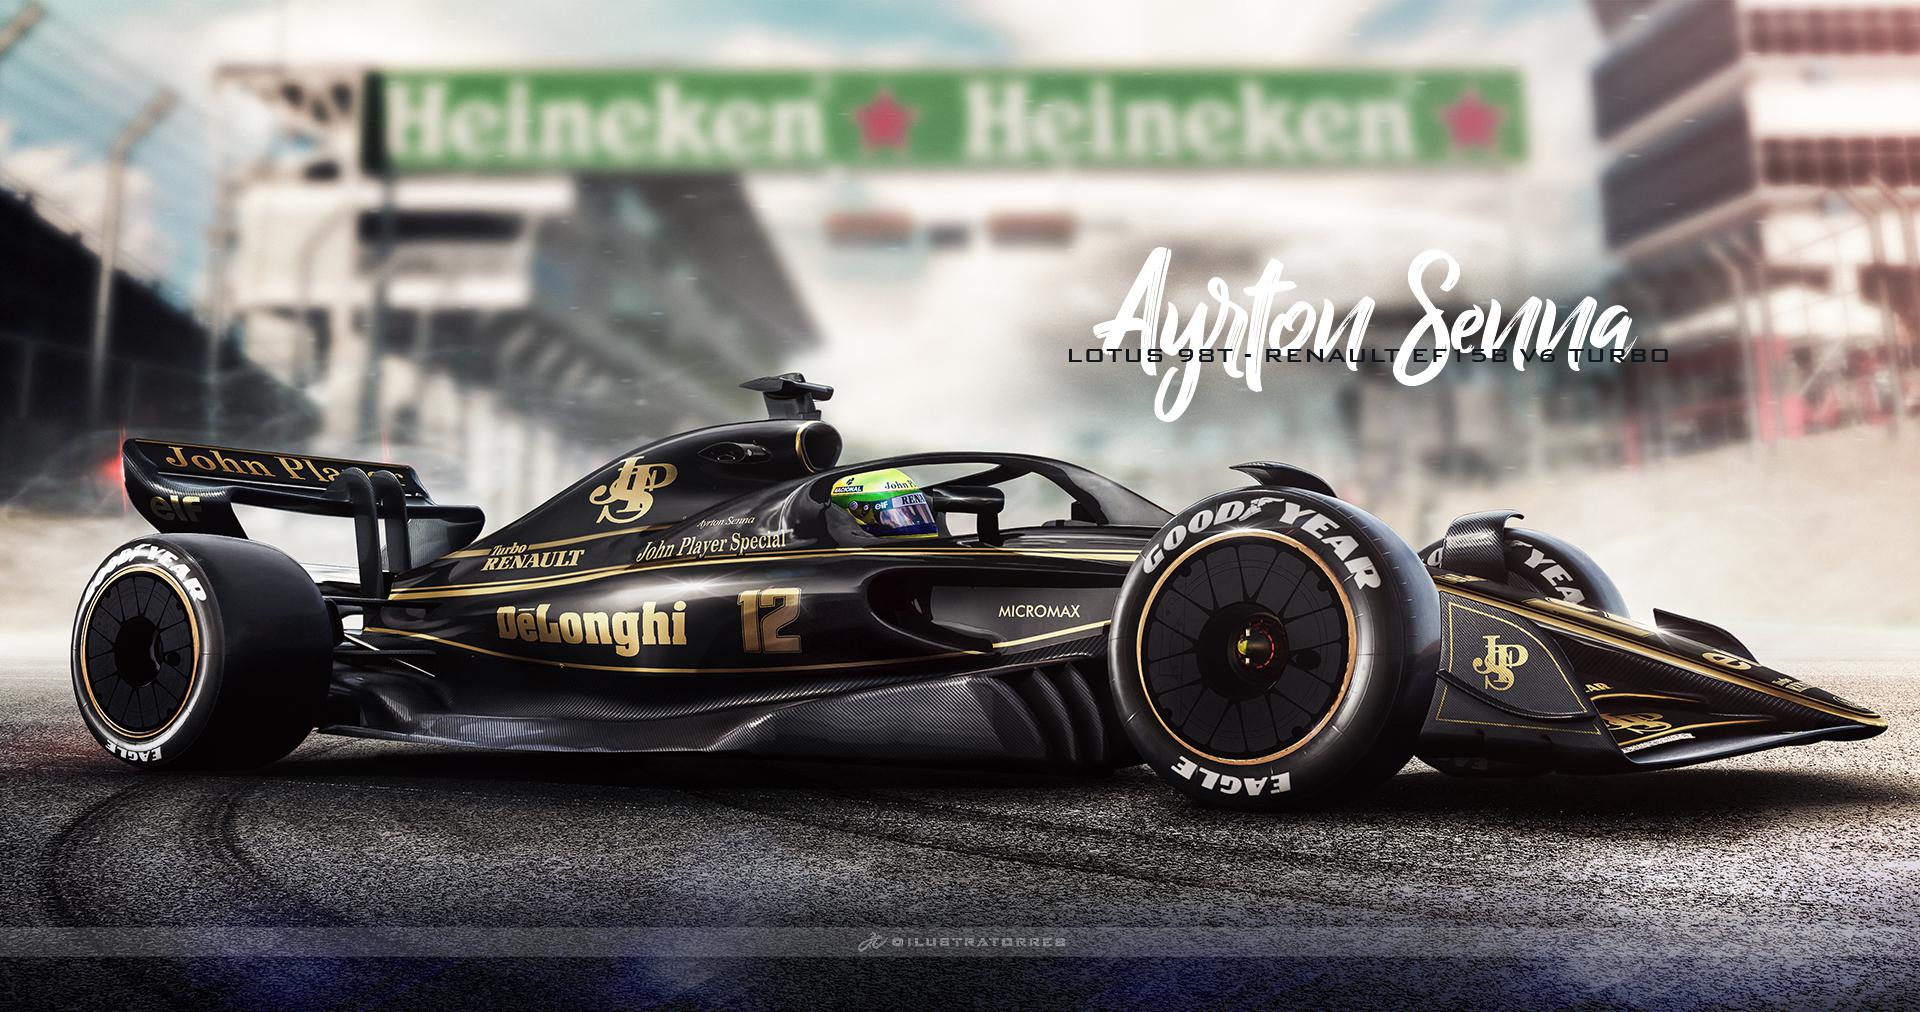 Lotus 98T livery on the 2021 chassis. : formula1